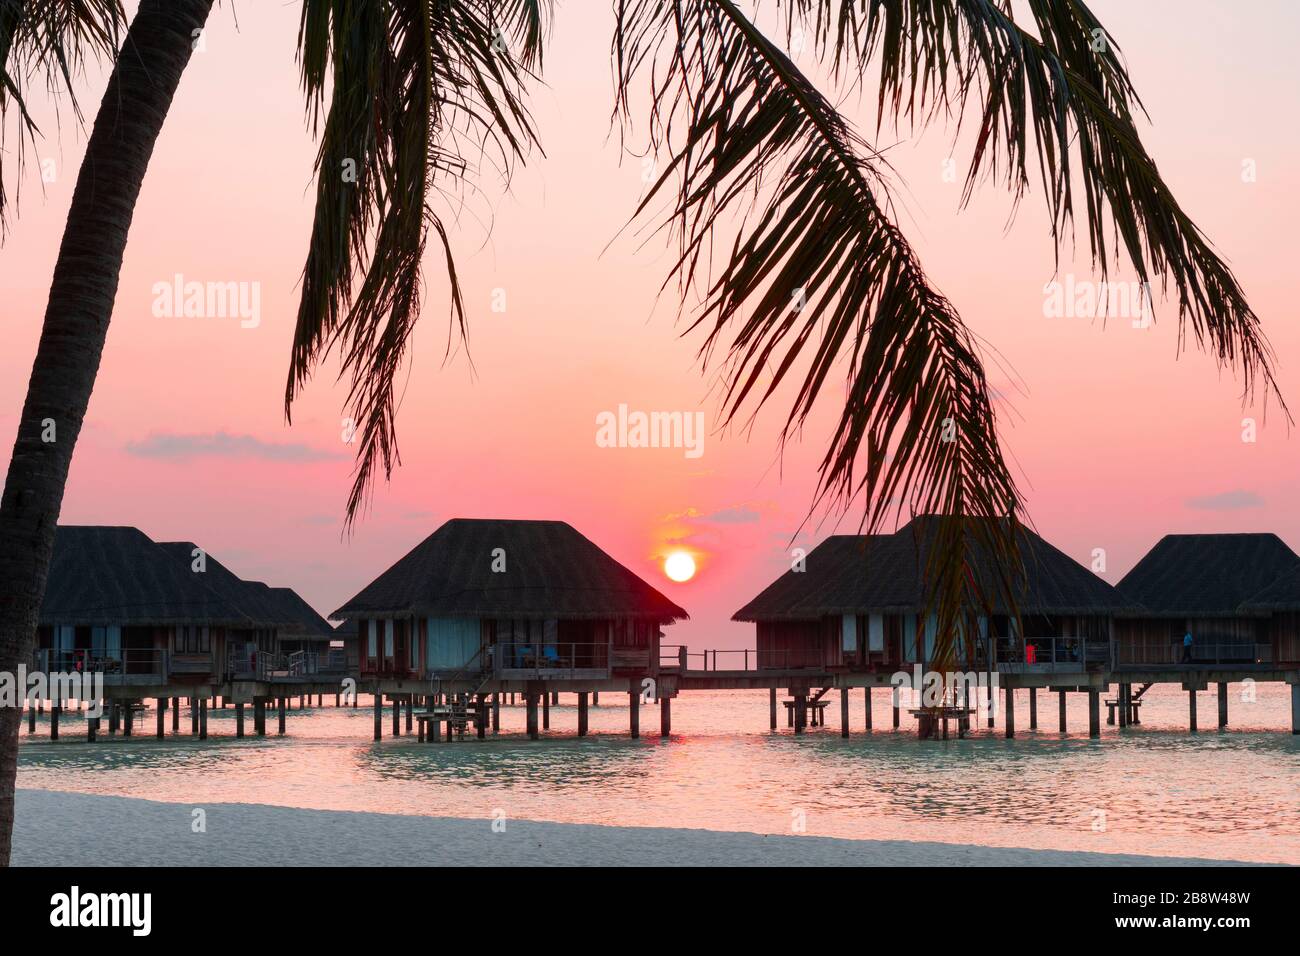 Sandy beach at sunset of tropical island in the Maldives Stock Photo